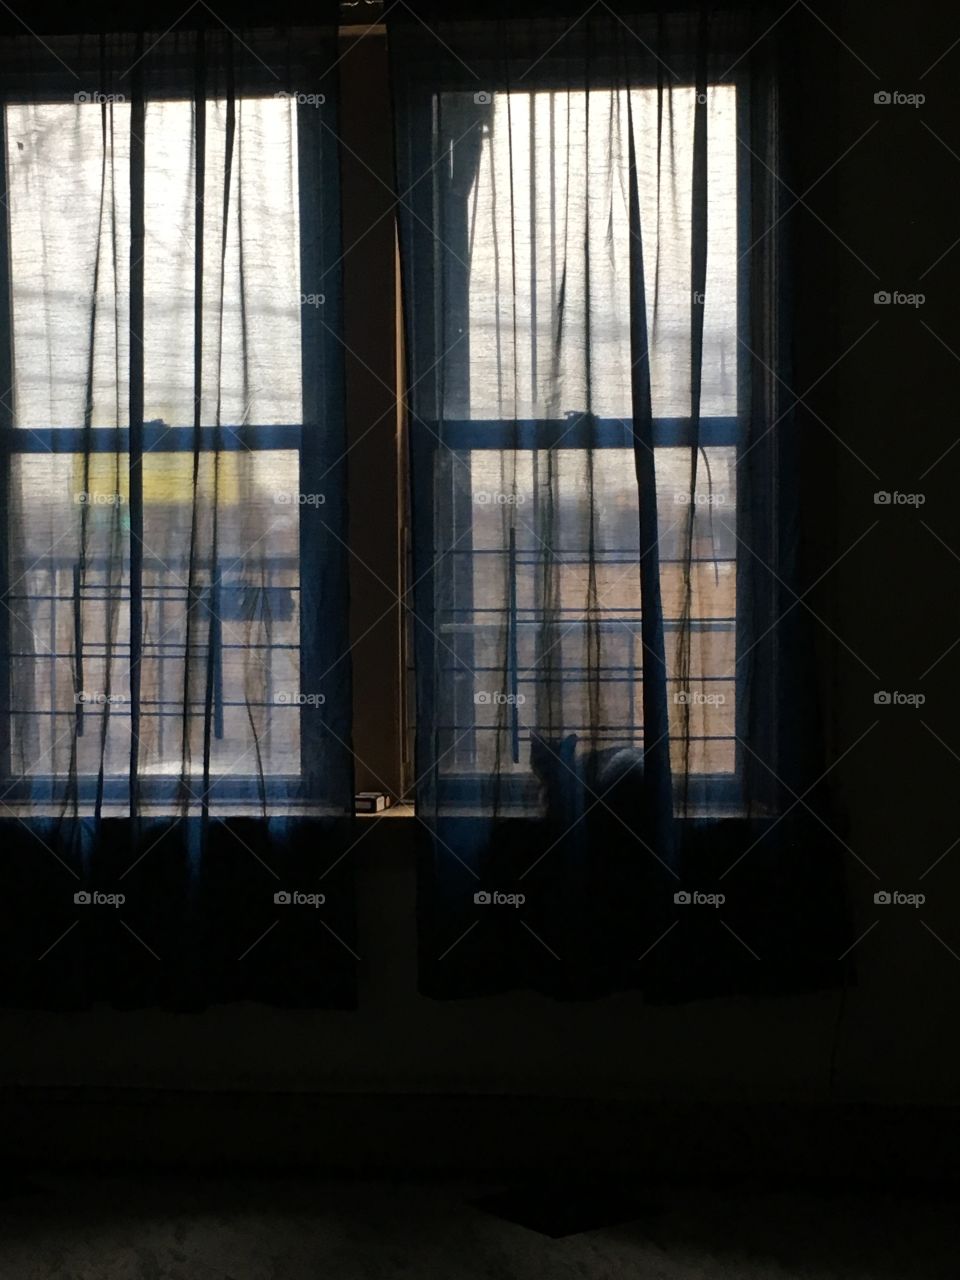 A Room With View (of a cat) 